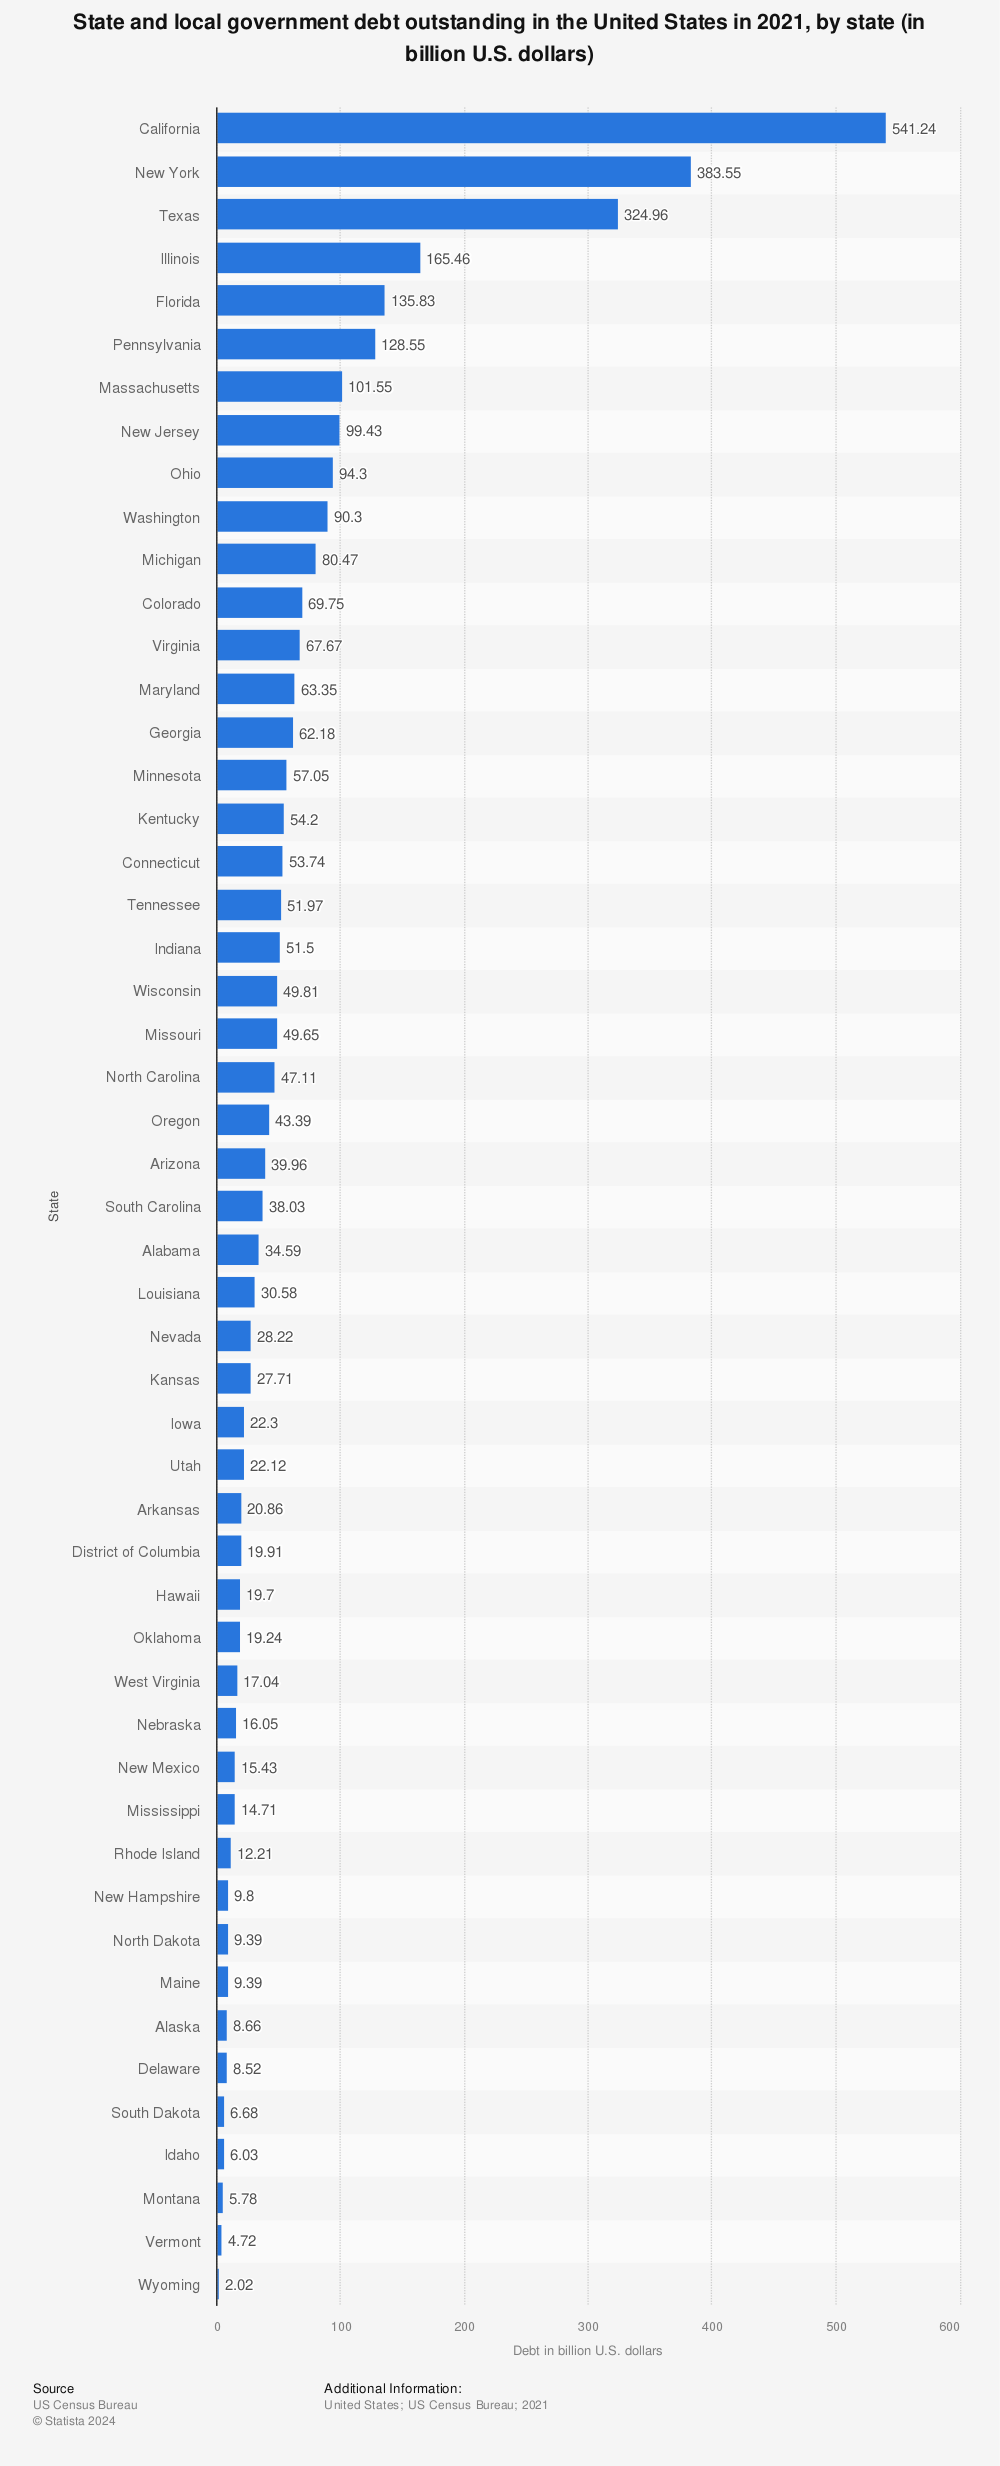 Statistic: State and local government debt outstanding in the United States in 2020, by state (in billion U.S. dollars) | Statista